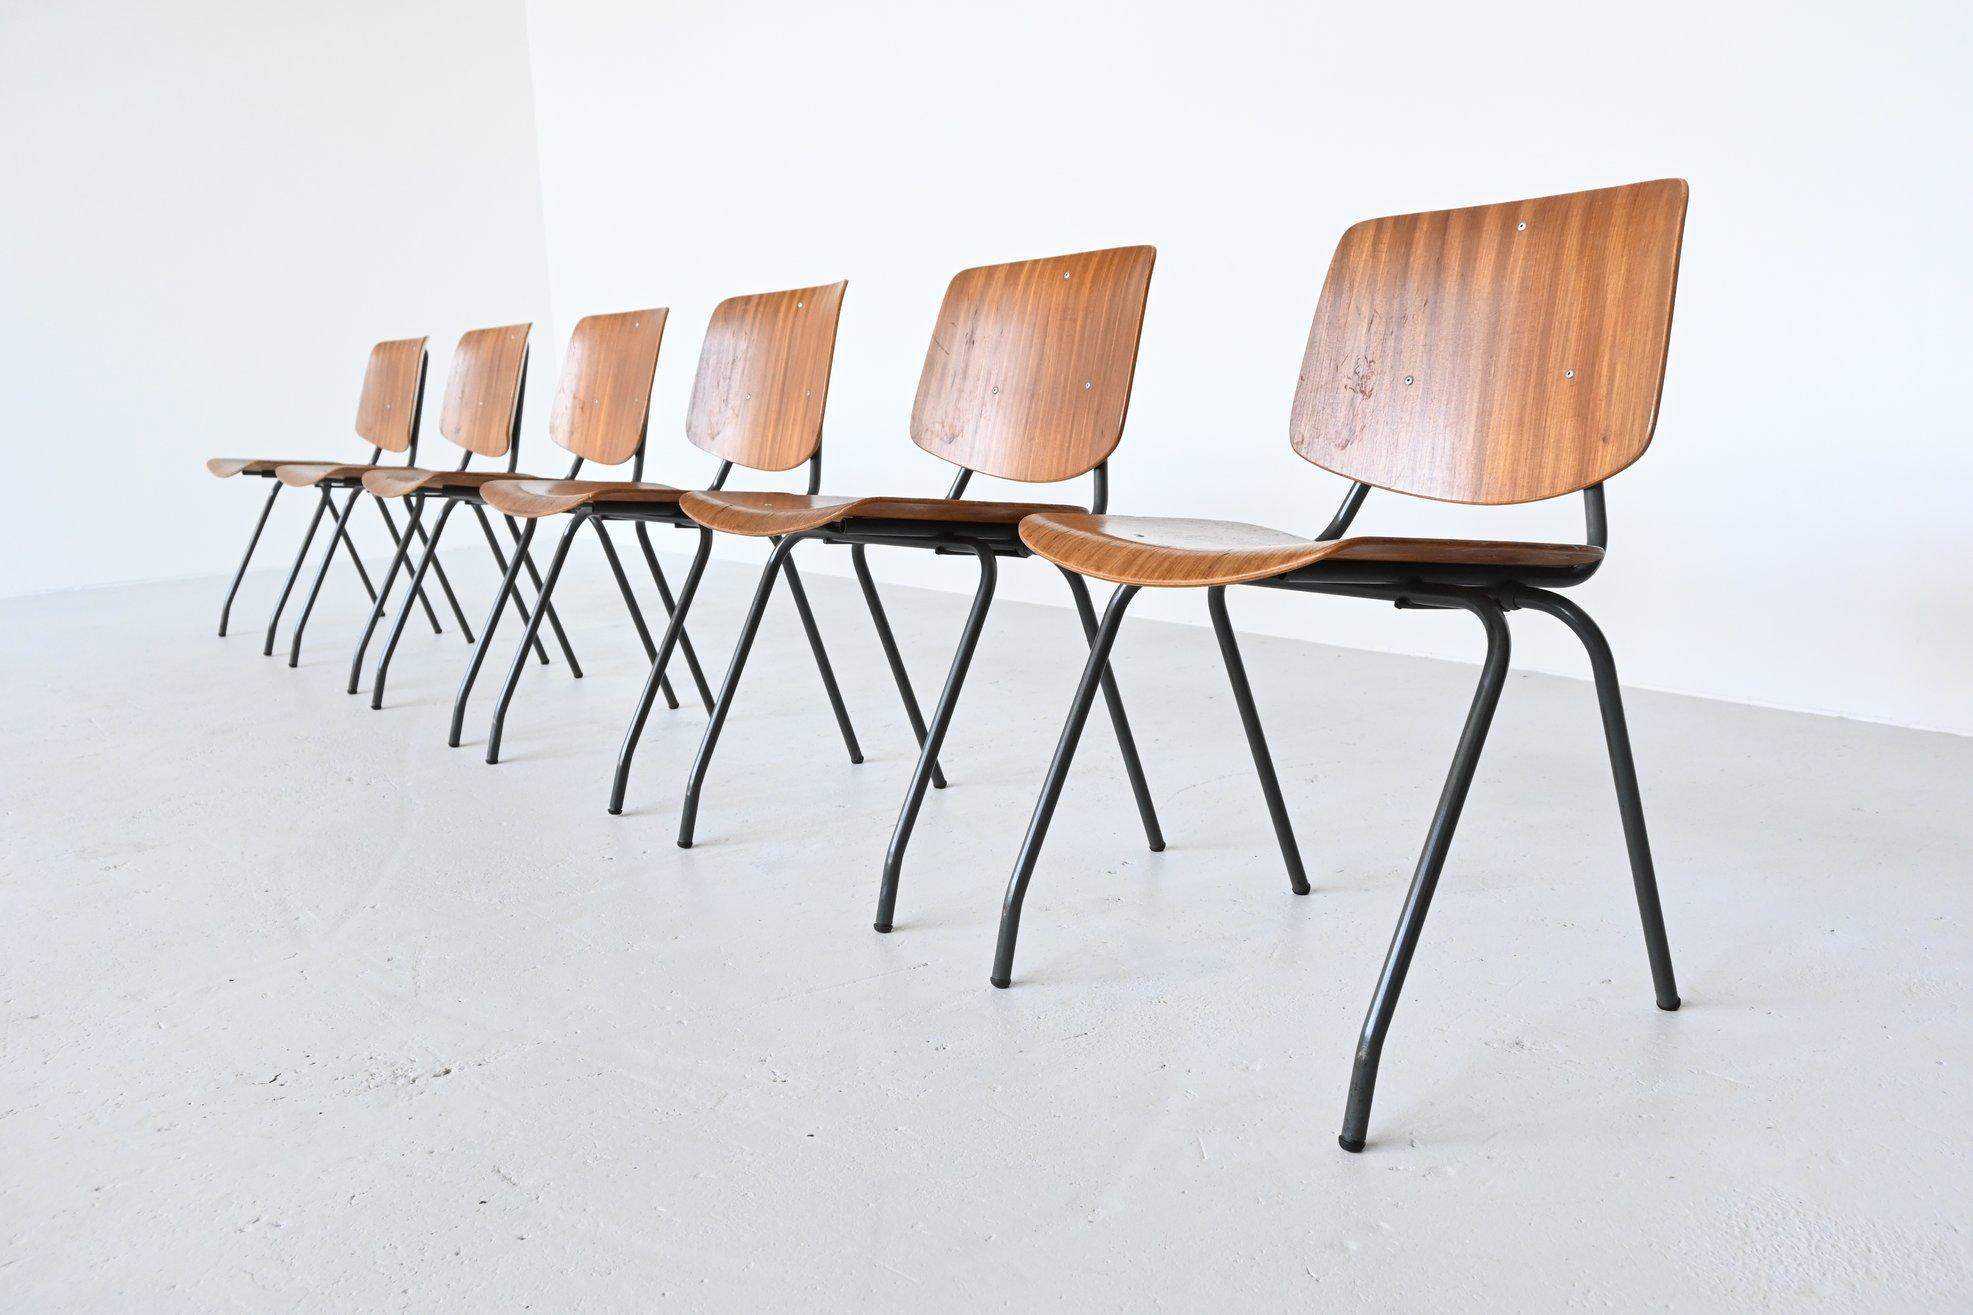 Very nice stacking chairs model 305 designed by Kho Liang Ie and manufactured by Car Katwijk, The Netherlands, 1957. This industrial chair was designed by Kho Liang Ie to compete with other chairs from the same period. They were cheap to produce and